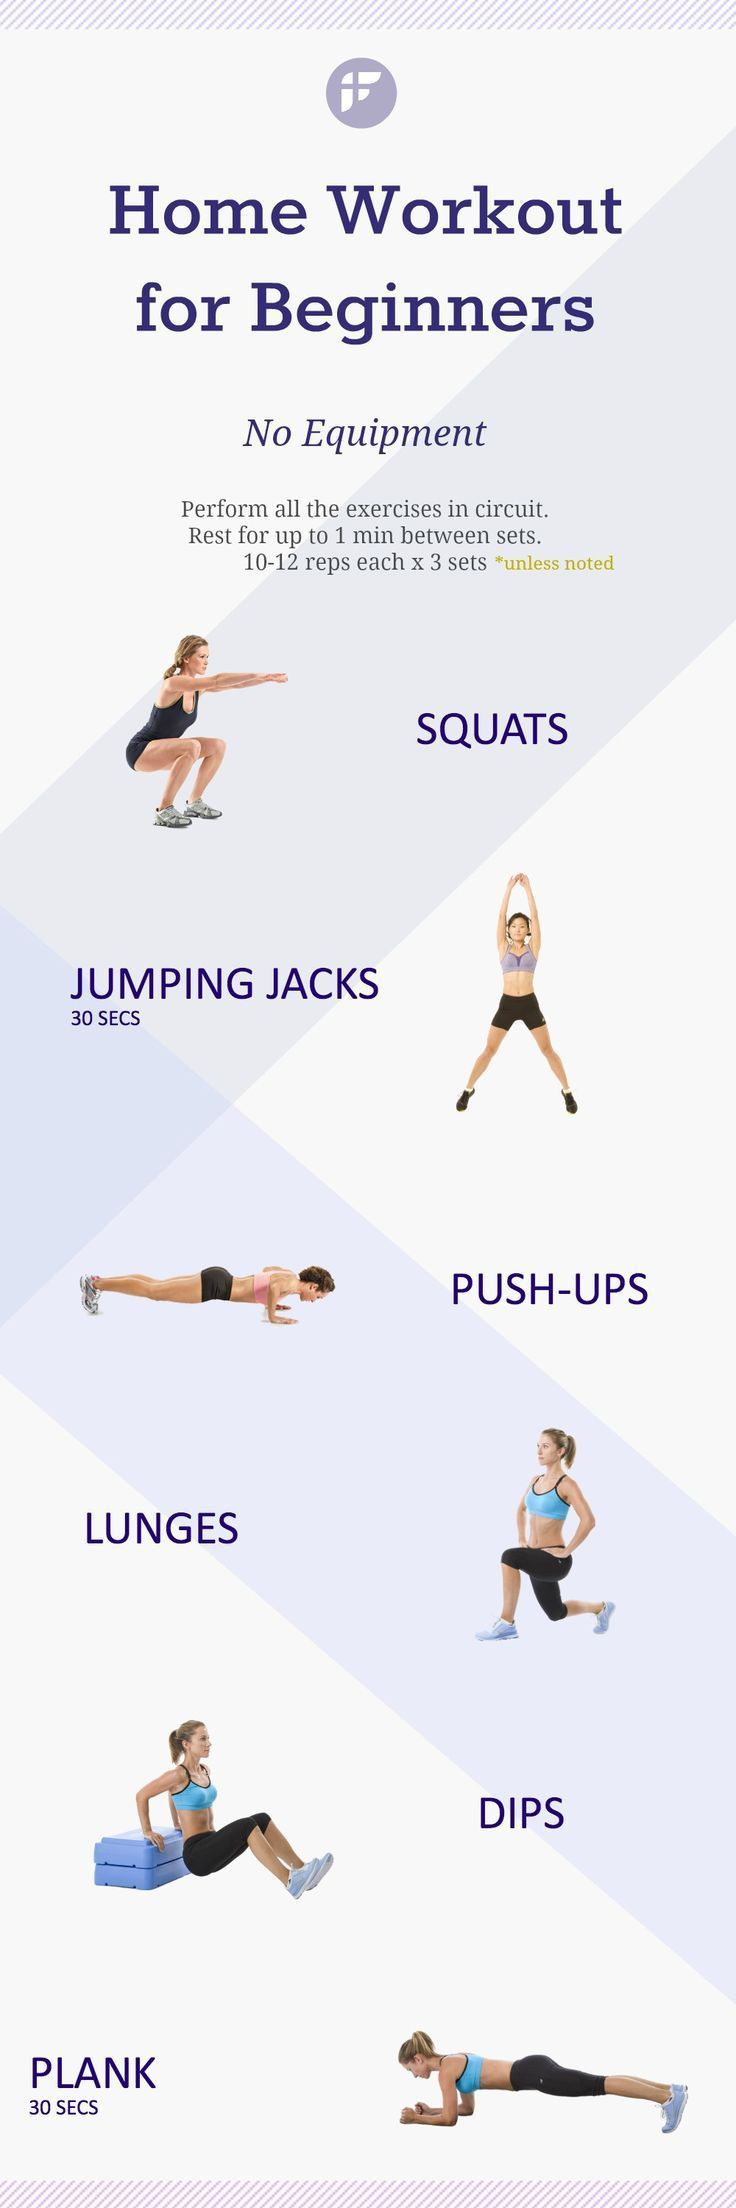 Weight Loss Exercises At Home For Women For Beginners
 Best 700 Workout Plan images on Pinterest